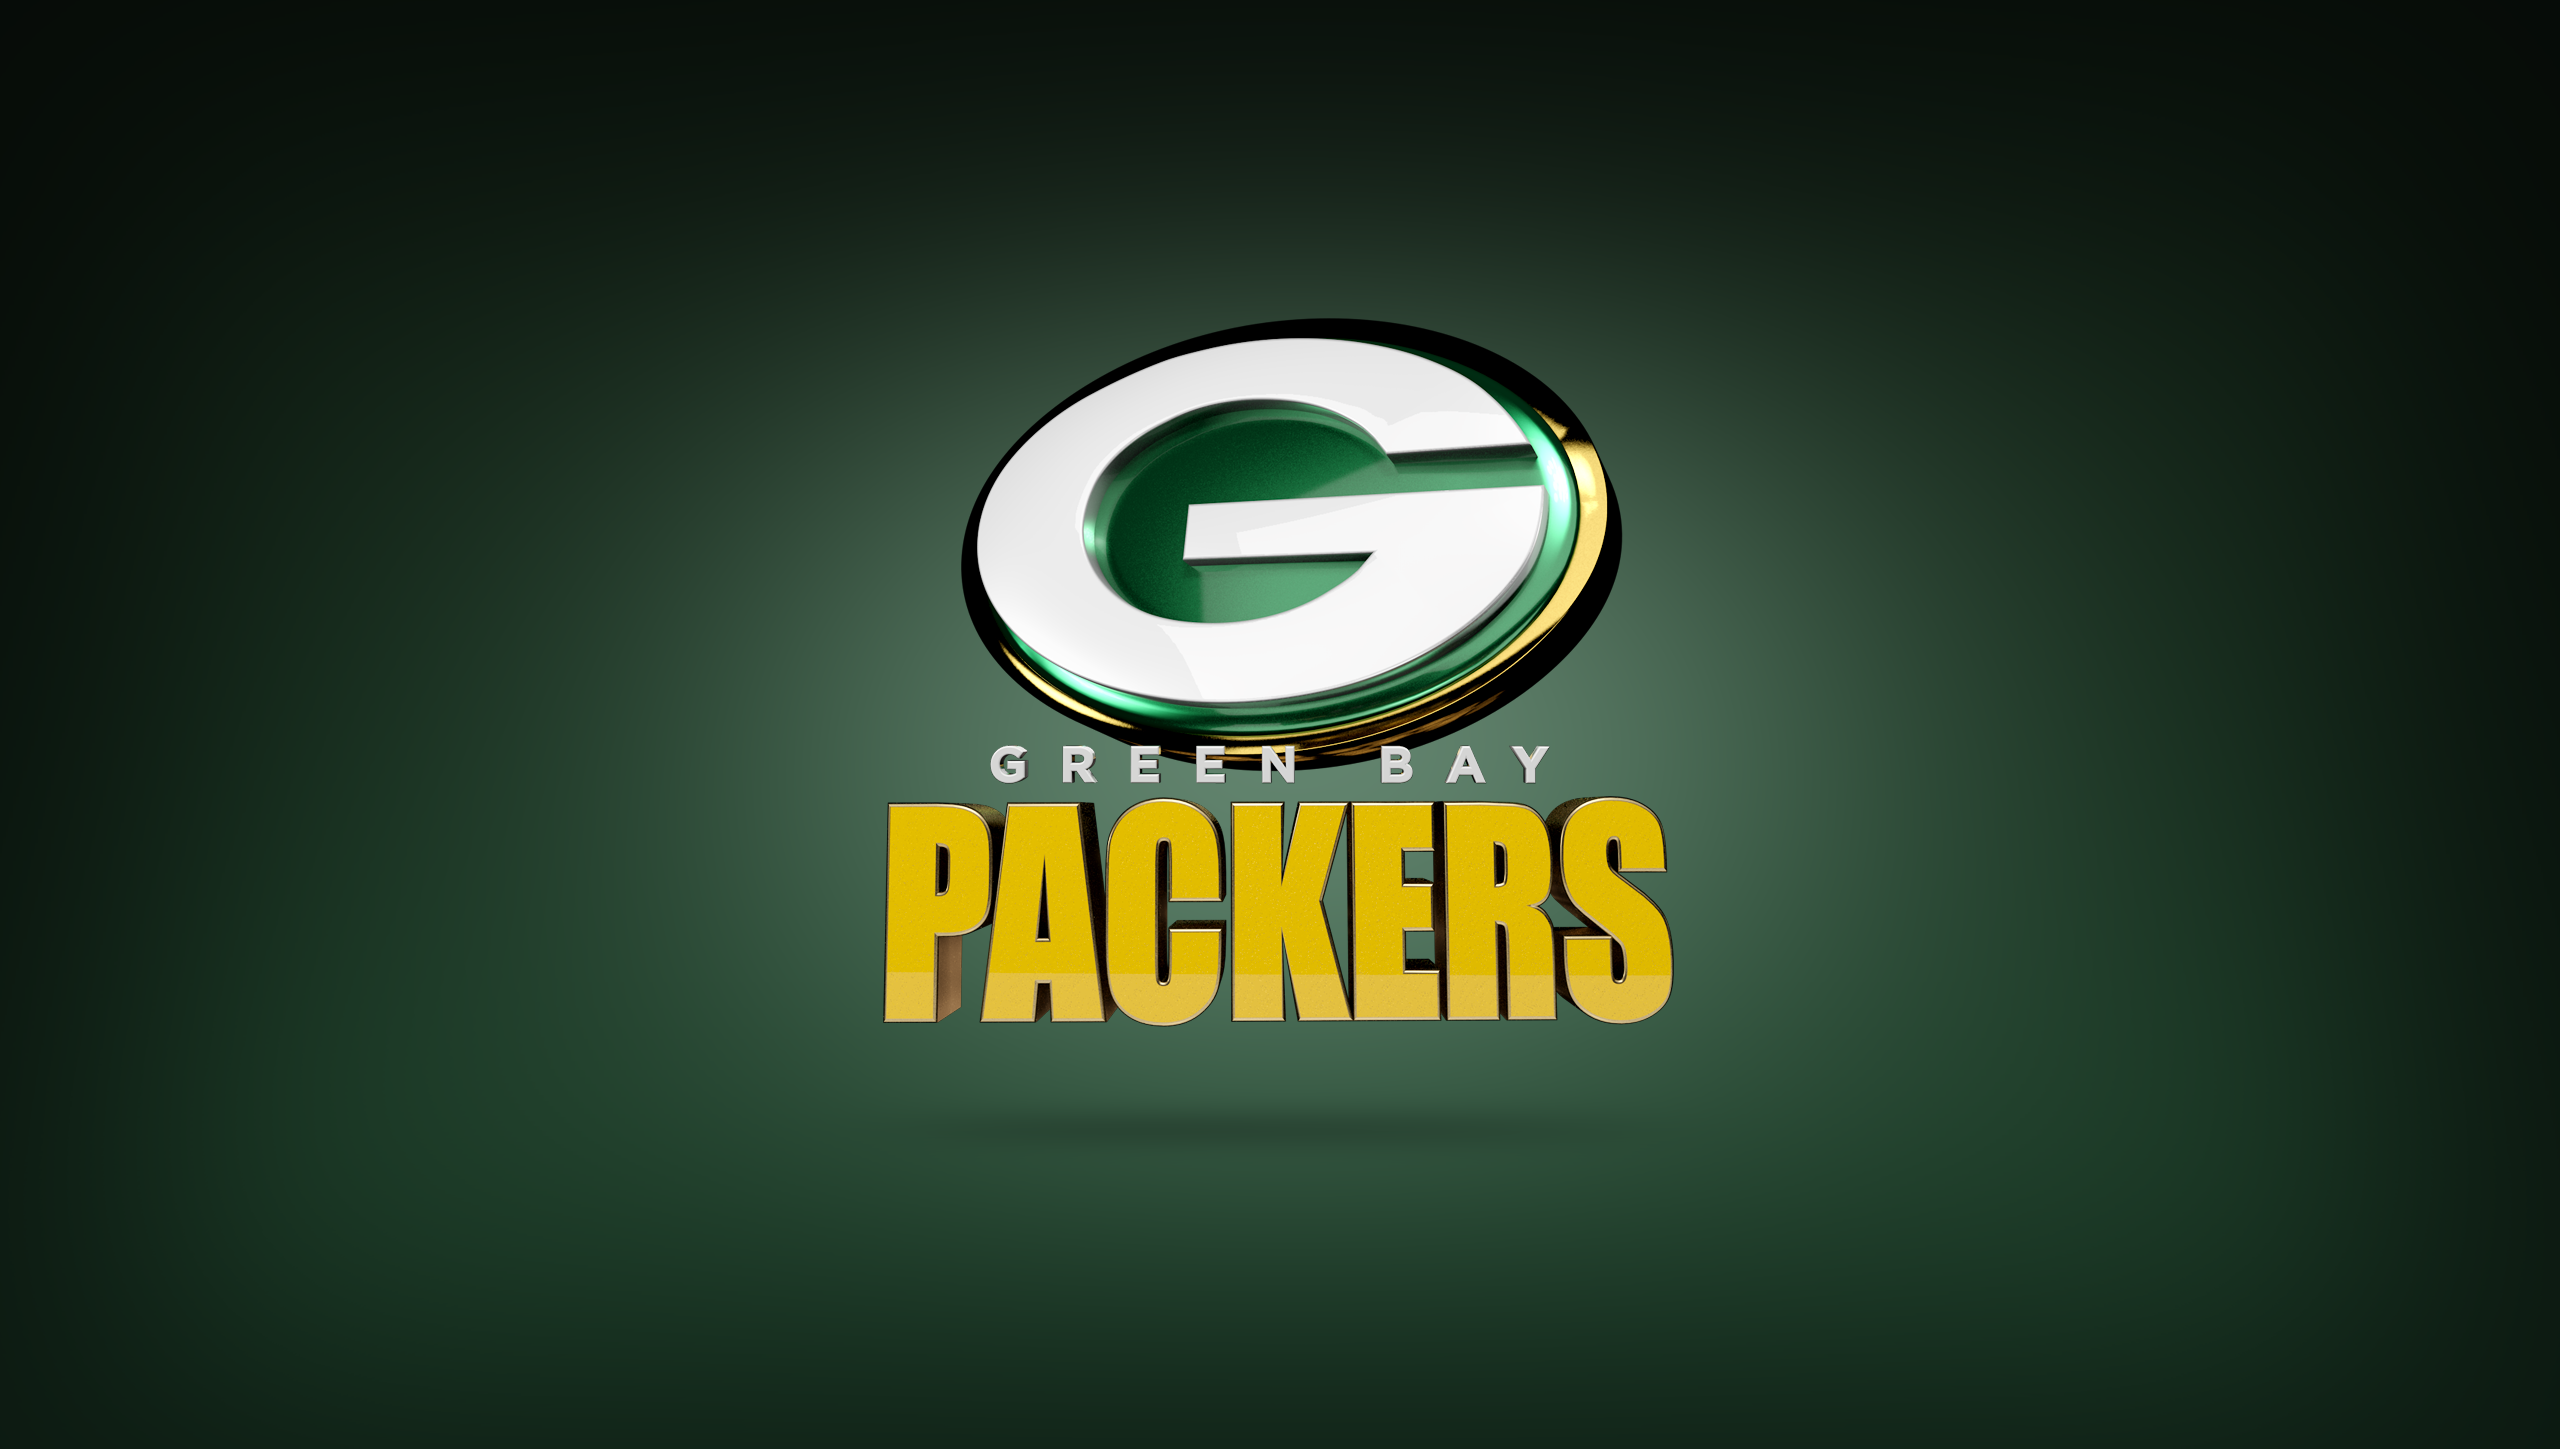 Green Bay Packers Schedule 2018 Wallpaper 80 images